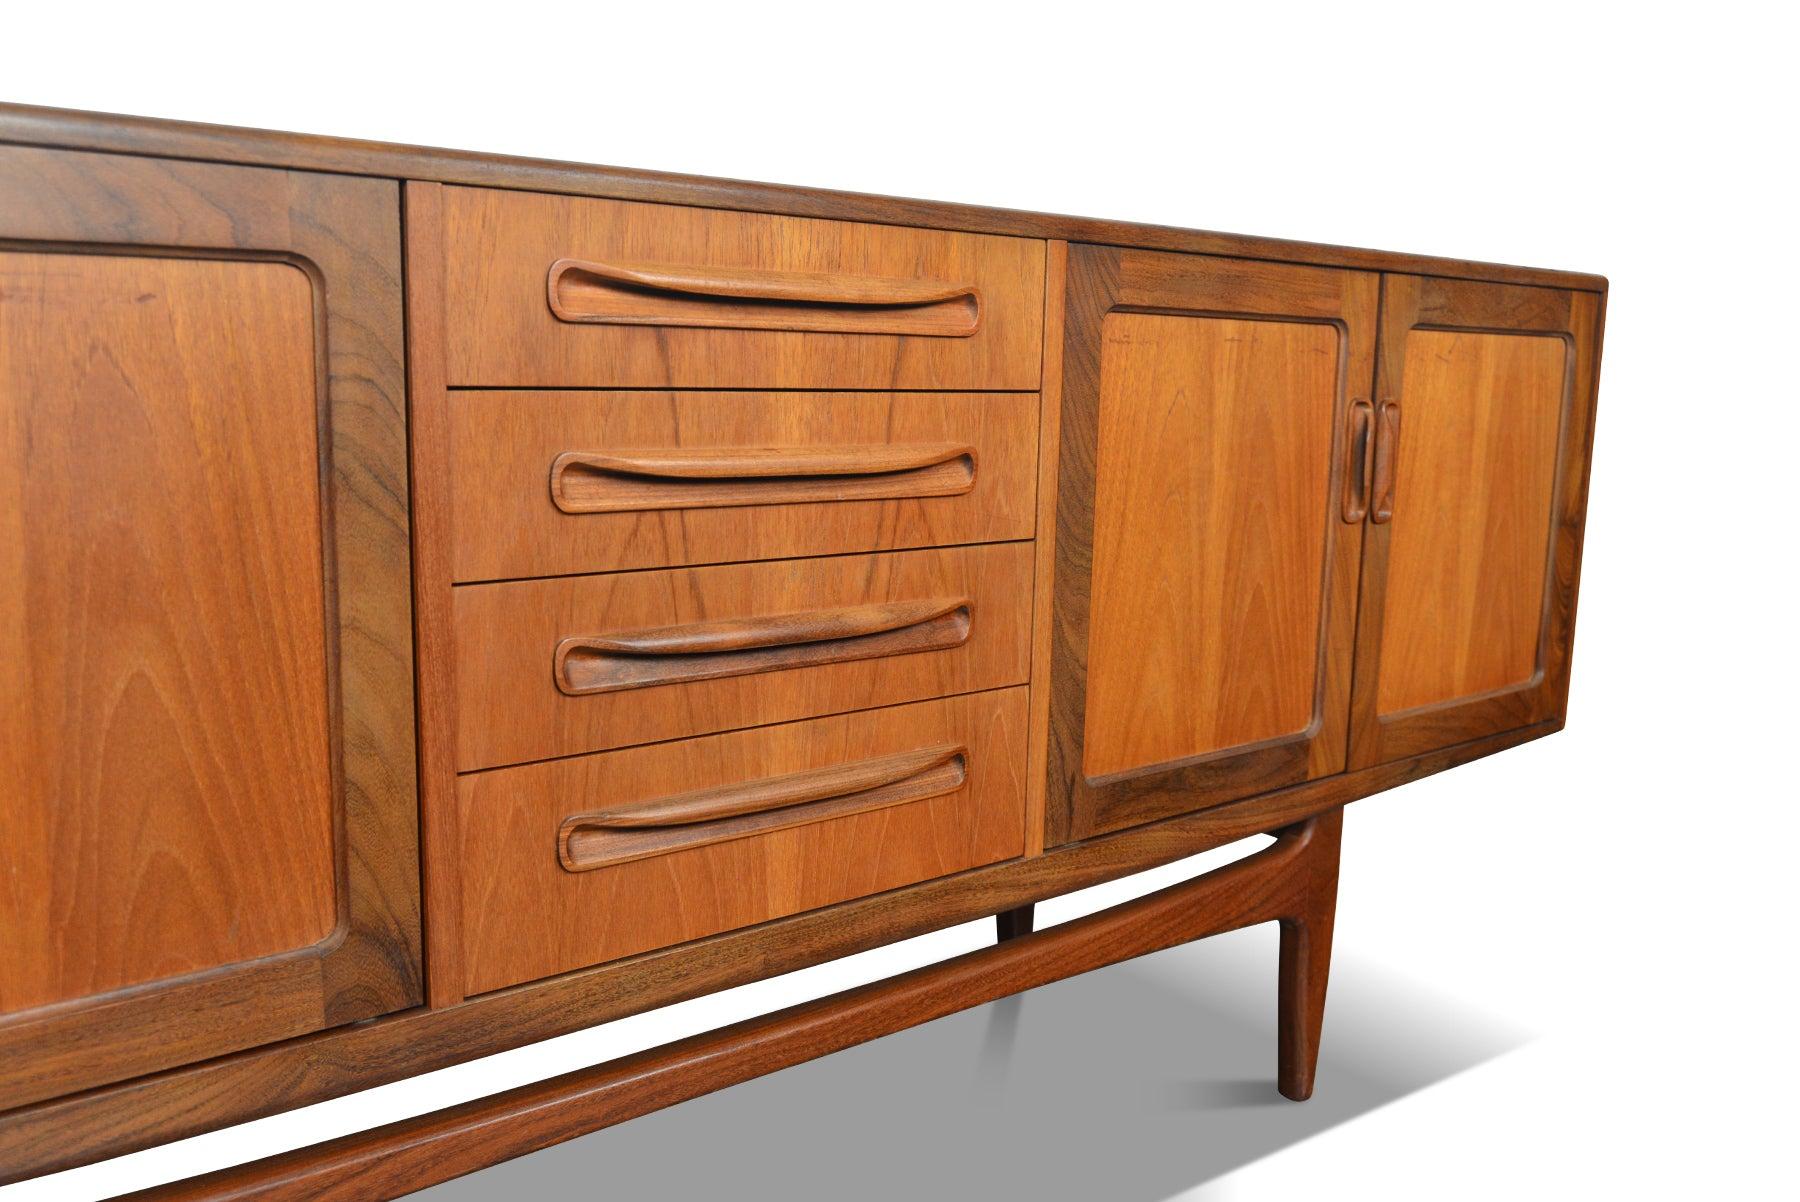 Origin: England
Designer: Victor B. Wilkins
Manufacturer: G Plan
Era: 1960s
Materials: Teak
Measurements: 84? wide x 18? deep x 31.5? tall

Condition: In excellent original condition with typical wear for its vintage. Price includes